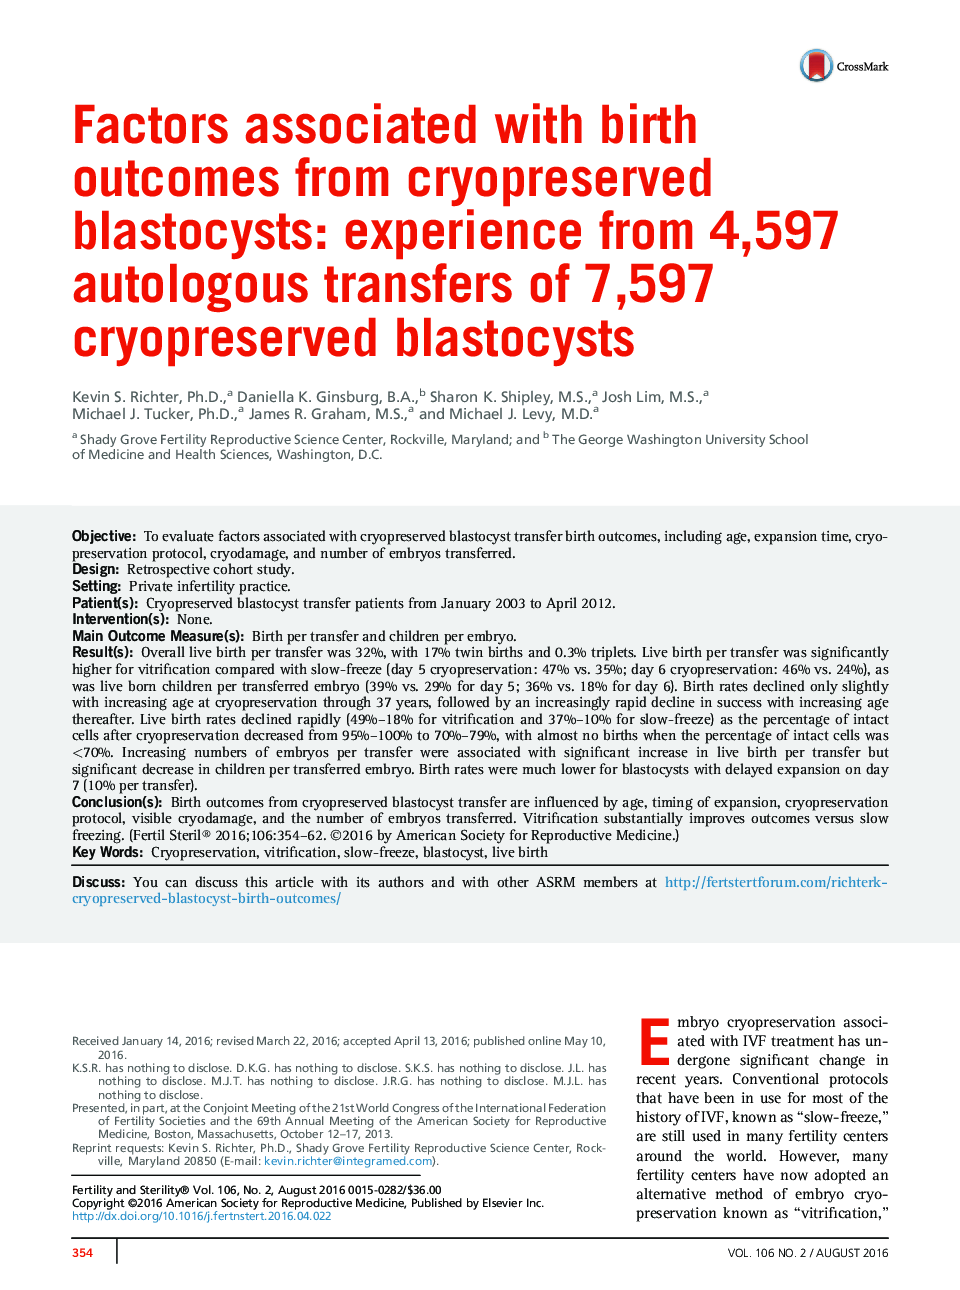 Factors associated with birth outcomes from cryopreserved blastocysts: experience from 4,597 autologous transfers of 7,597 cryopreserved blastocysts